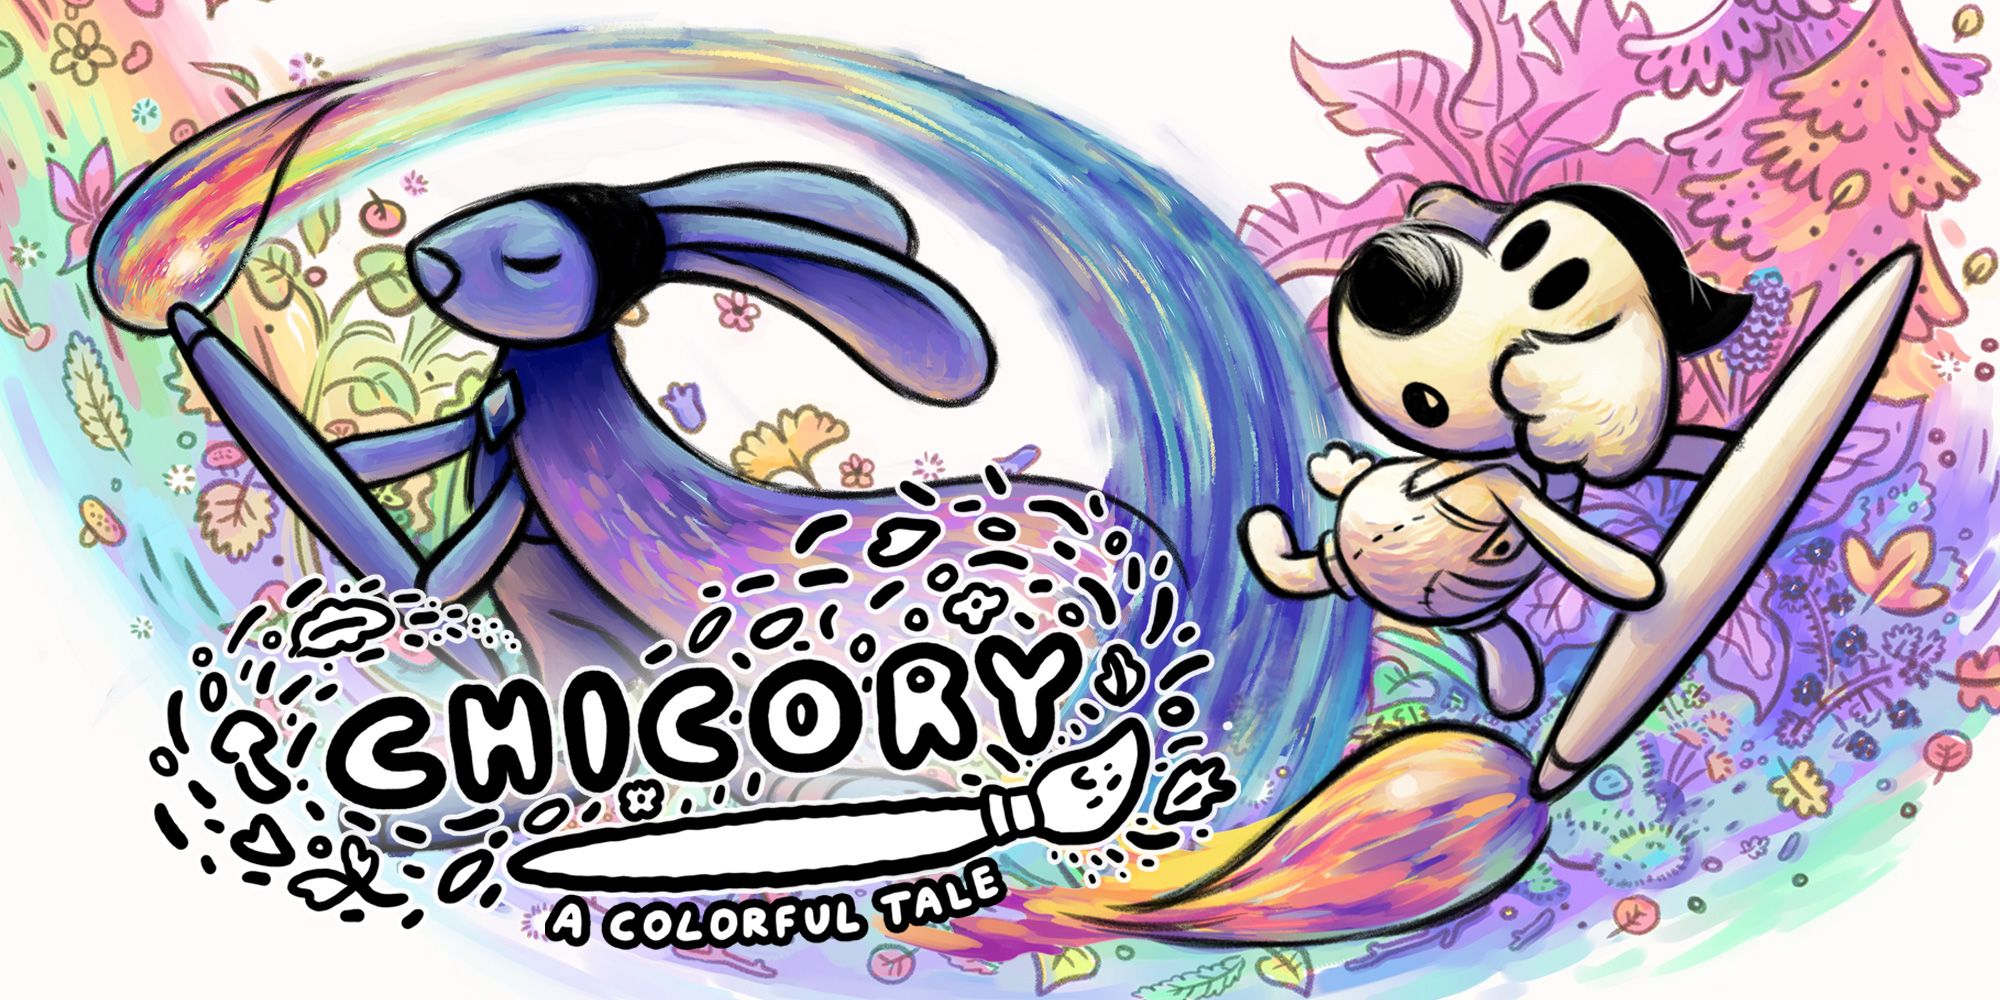 Key art for Chicory A Colorful Tale showing a dog and rabbit with a paintbrush.